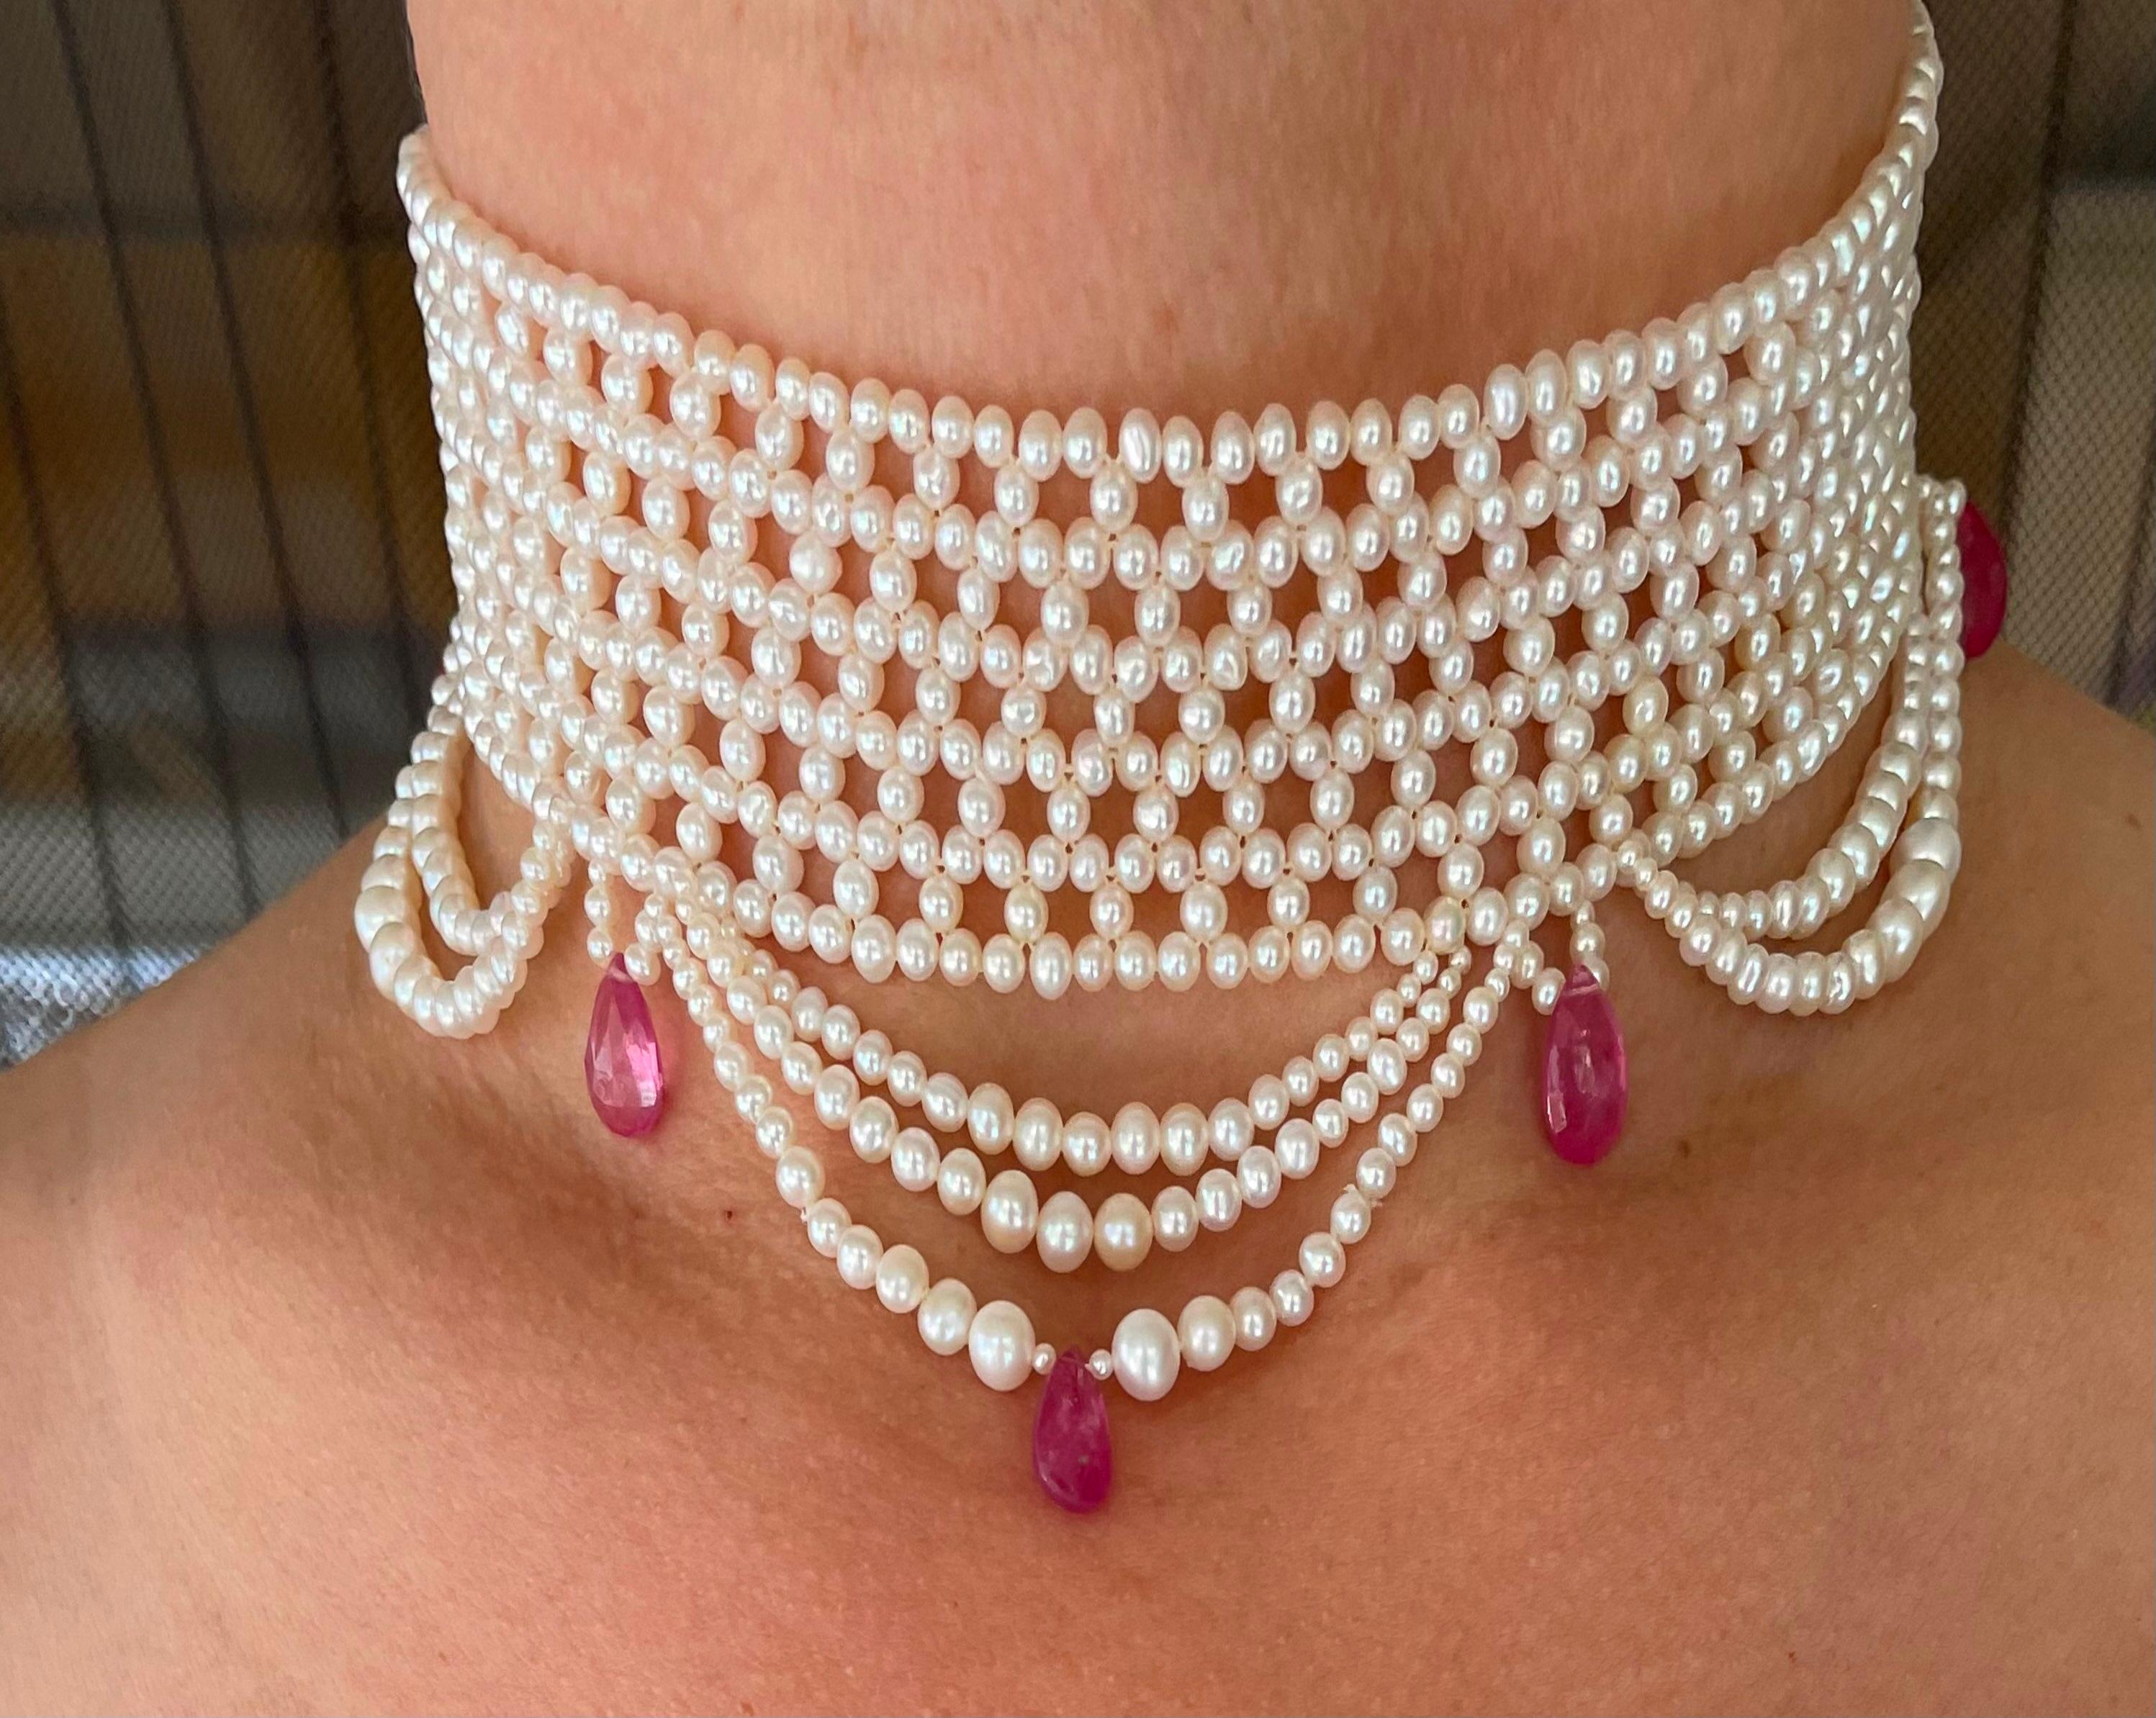 Marina J. Pink Sapphire & Pearl Woven Choker with Rhodium Plated Silver Clasp For Sale 3